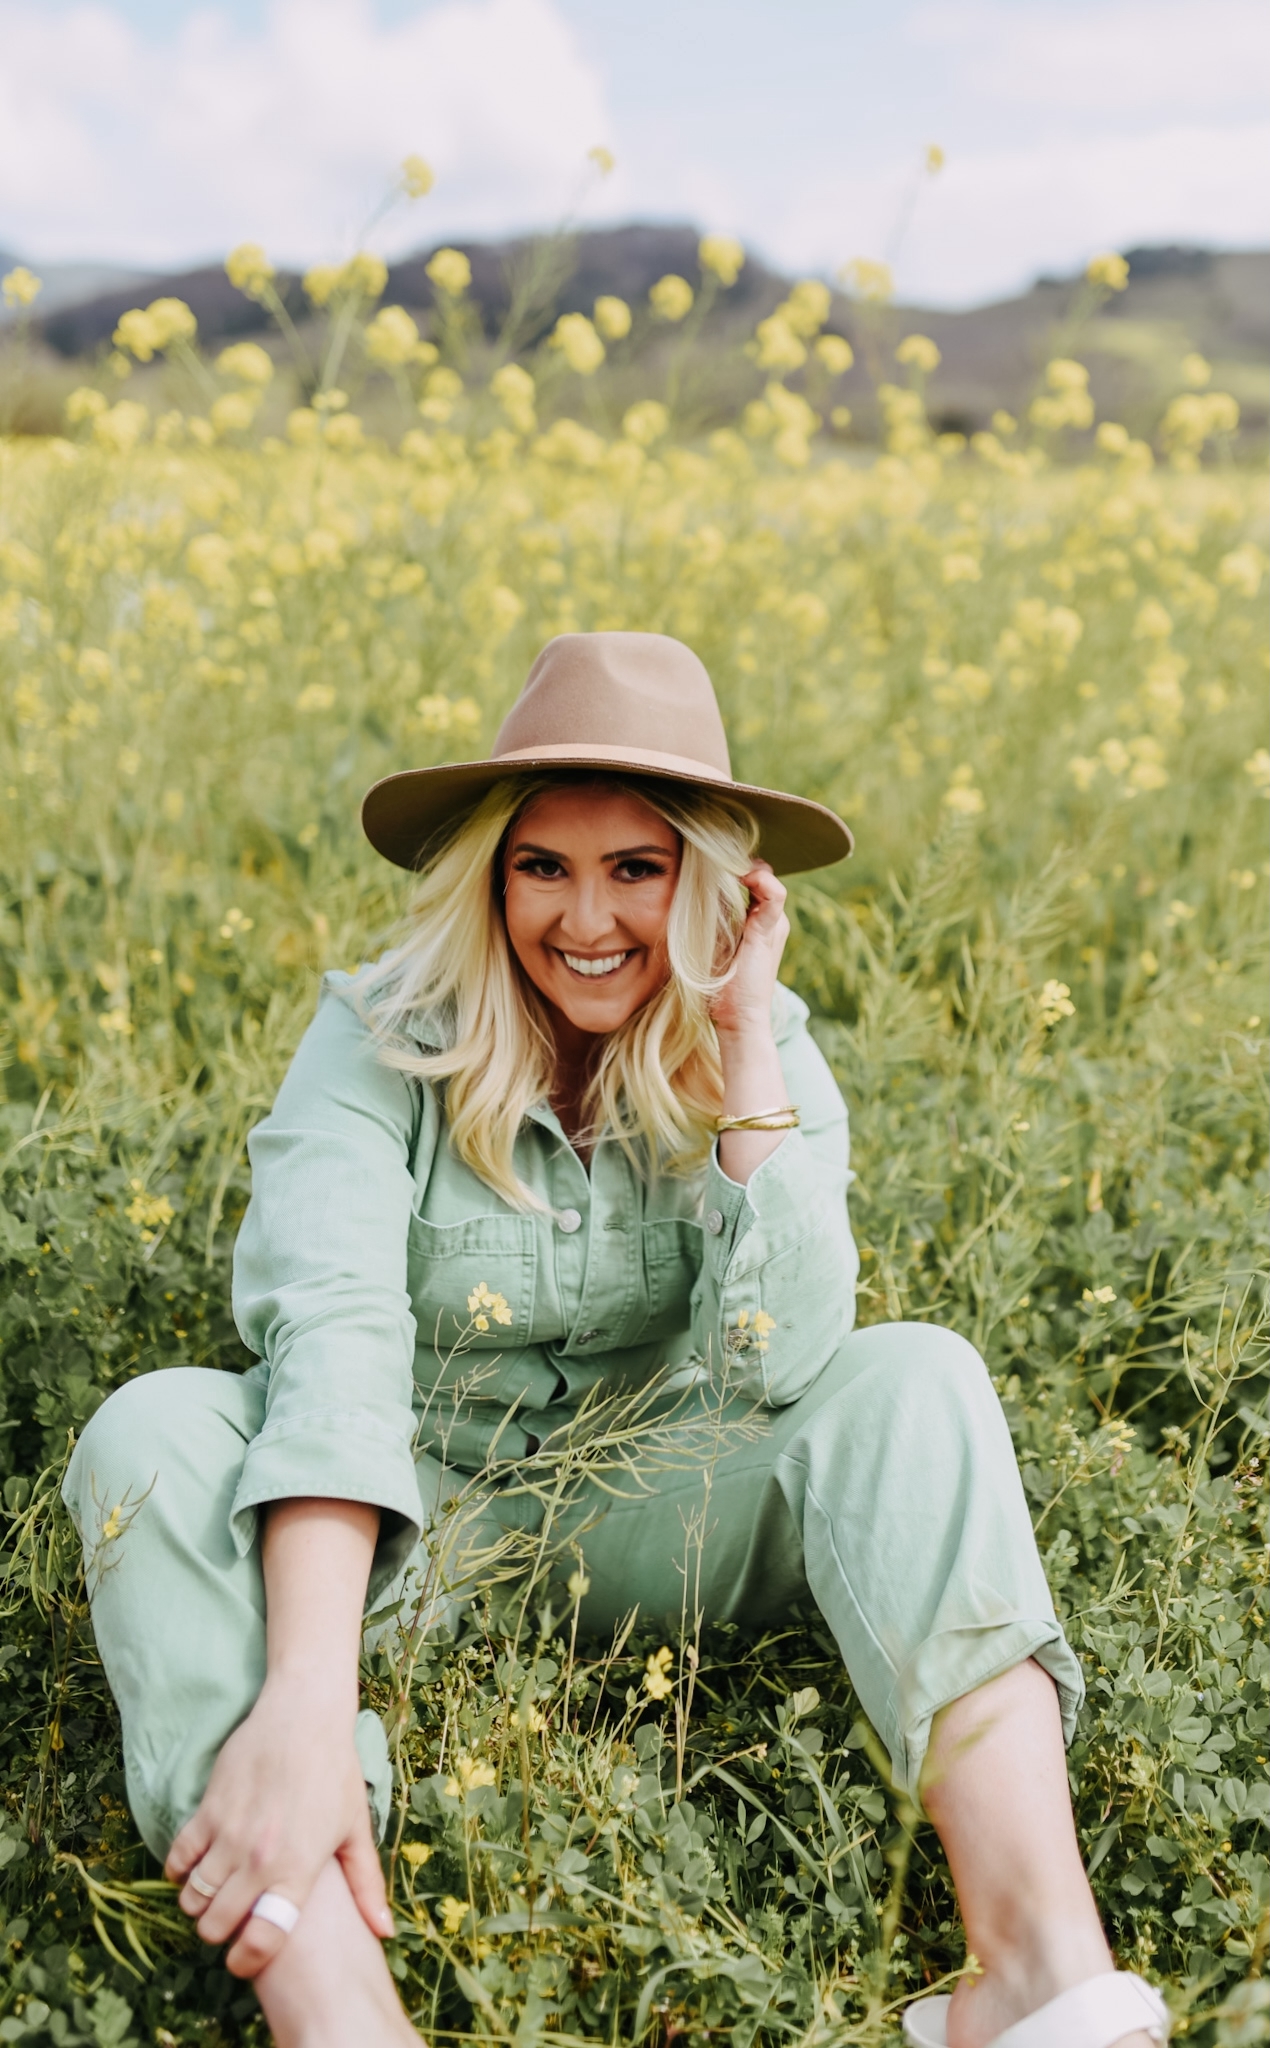 KatWalkSF wearing the Madewell Coverall Jumpsuit at the Half Moon Bay Superbloom